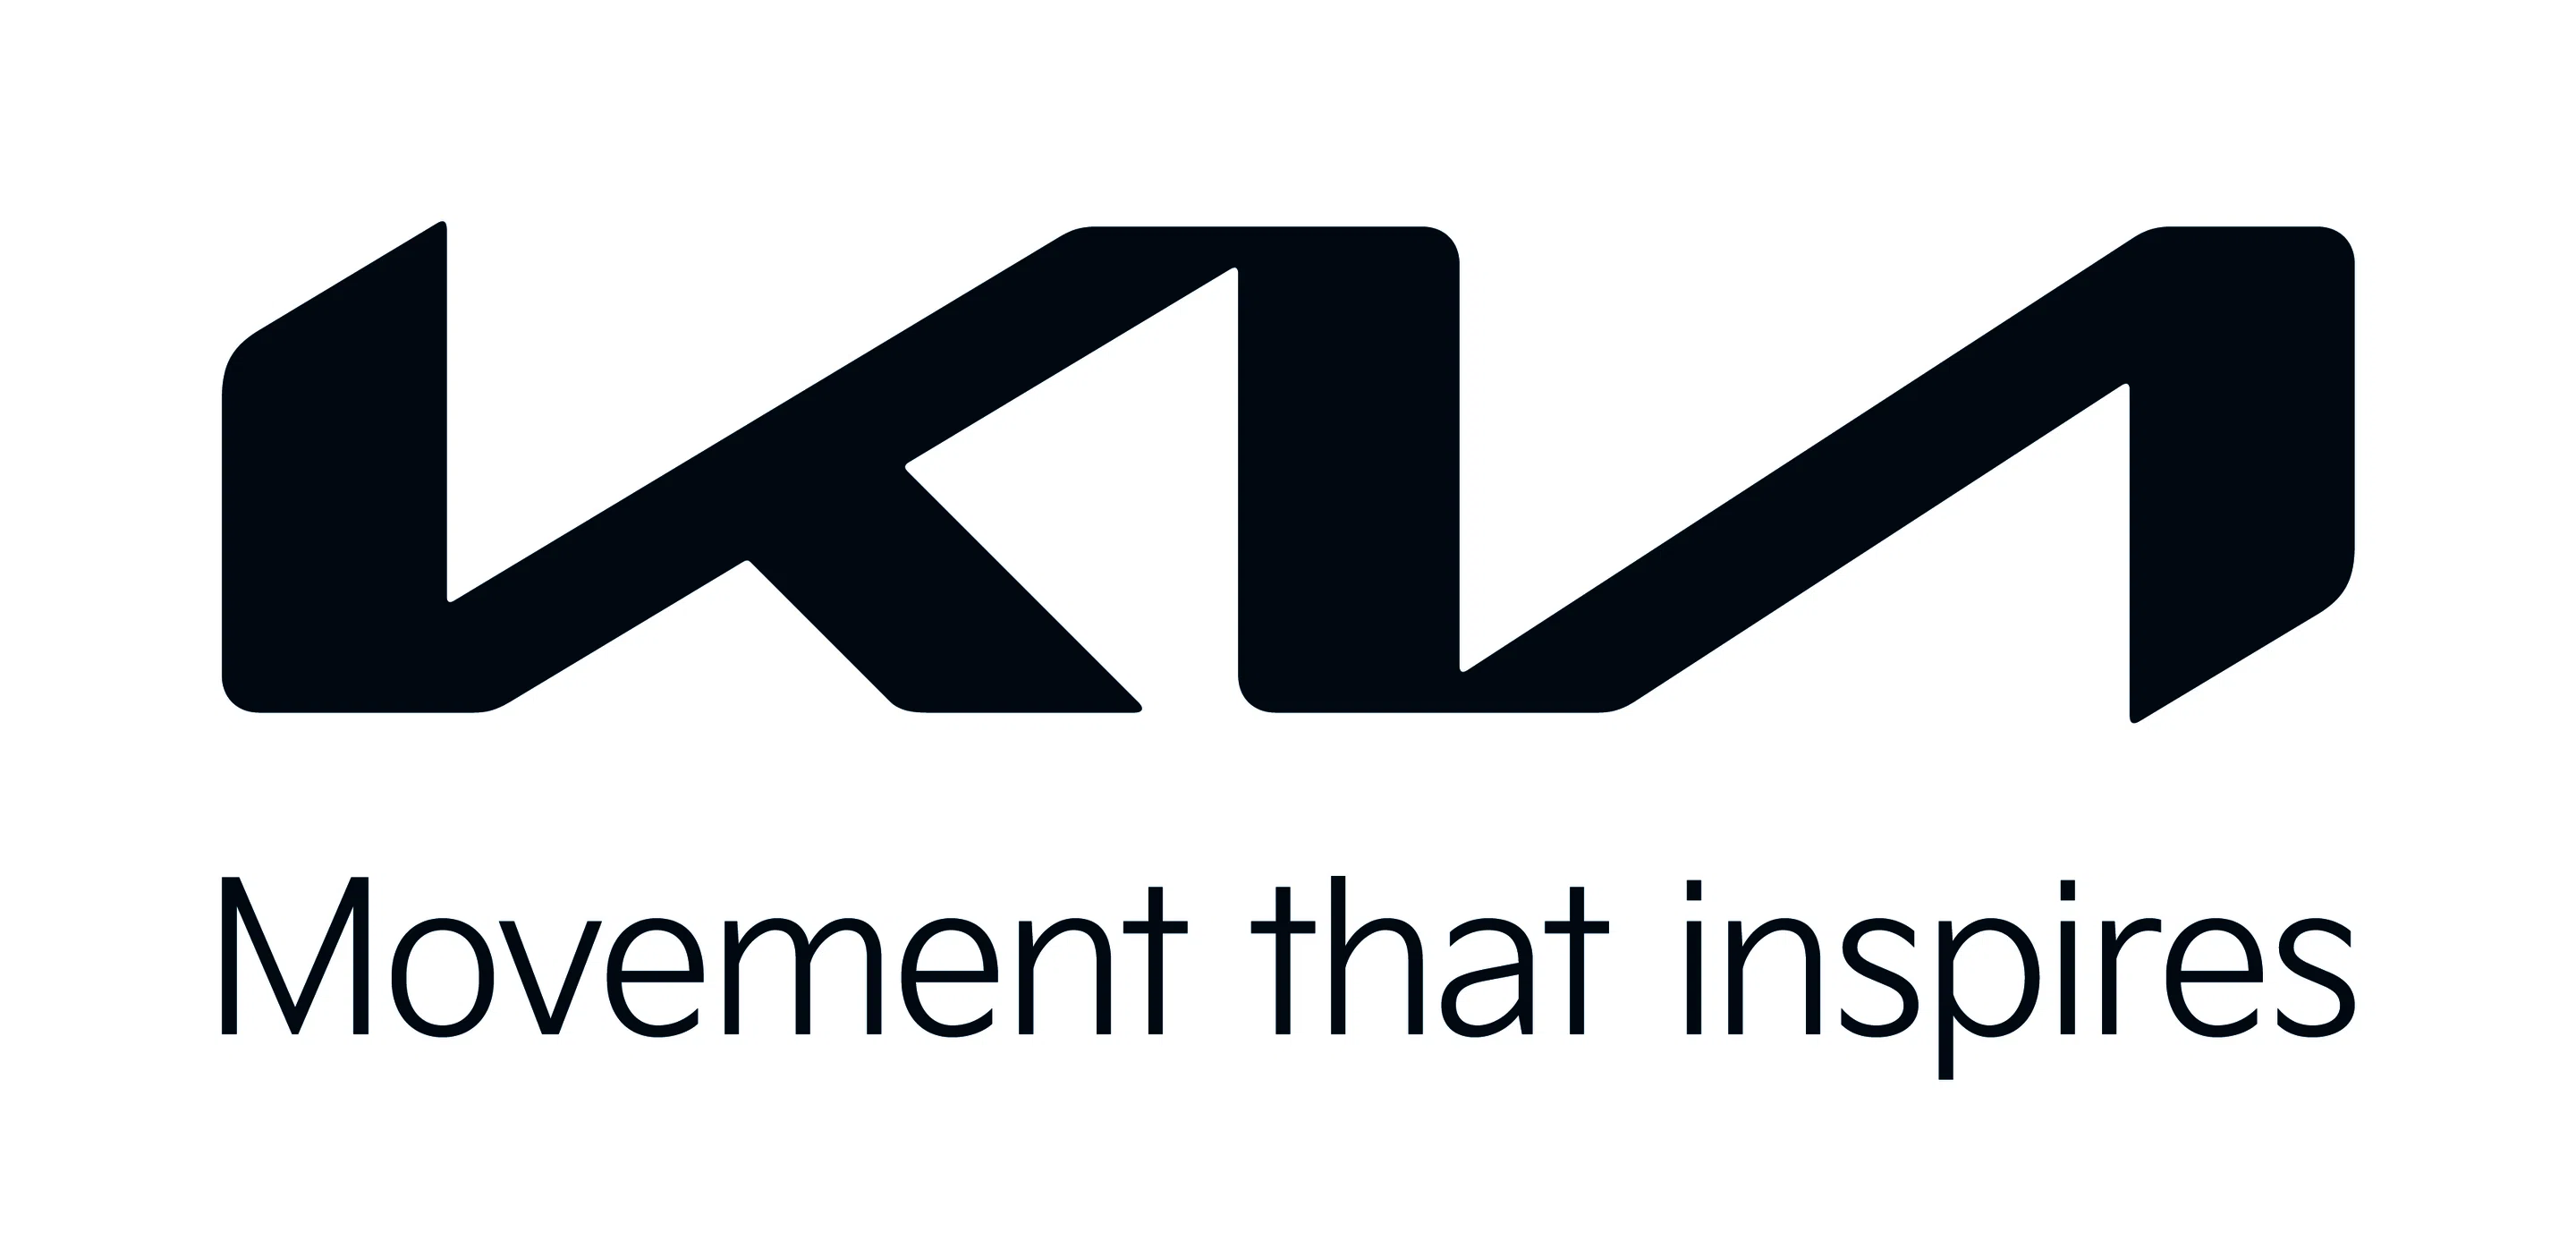 Kia unveils rebrand with dramatically different logo design resembling a  handwritten signature